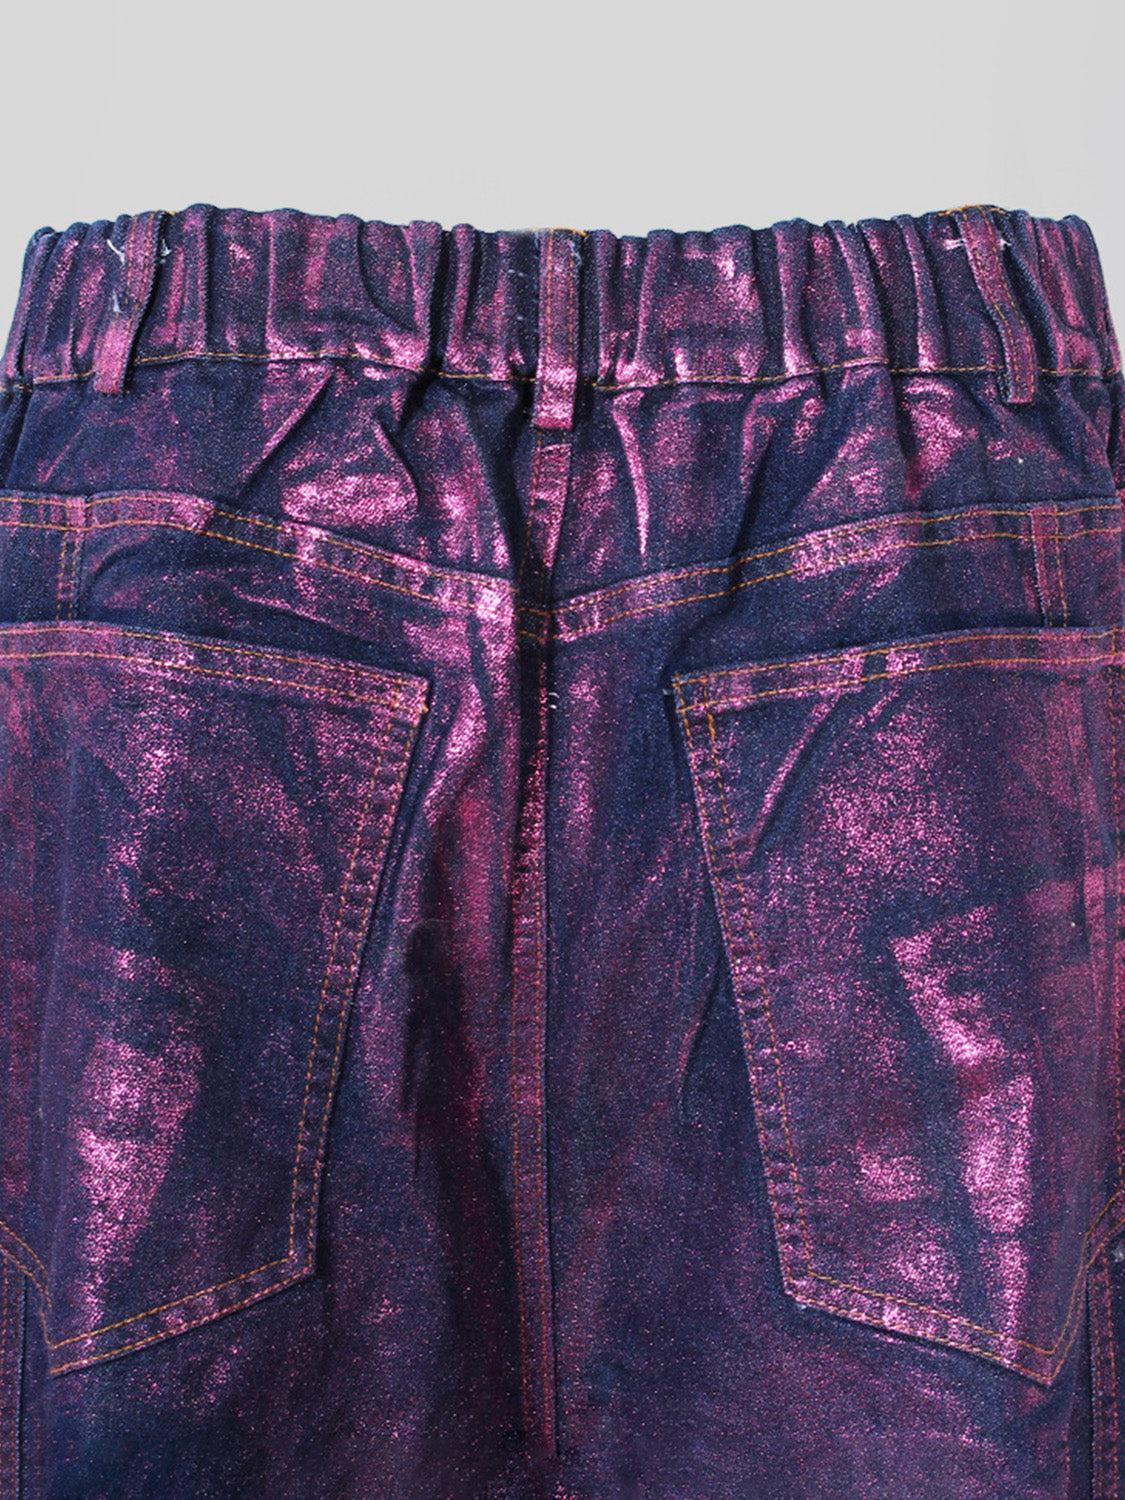 a close up of a pair of purple pants